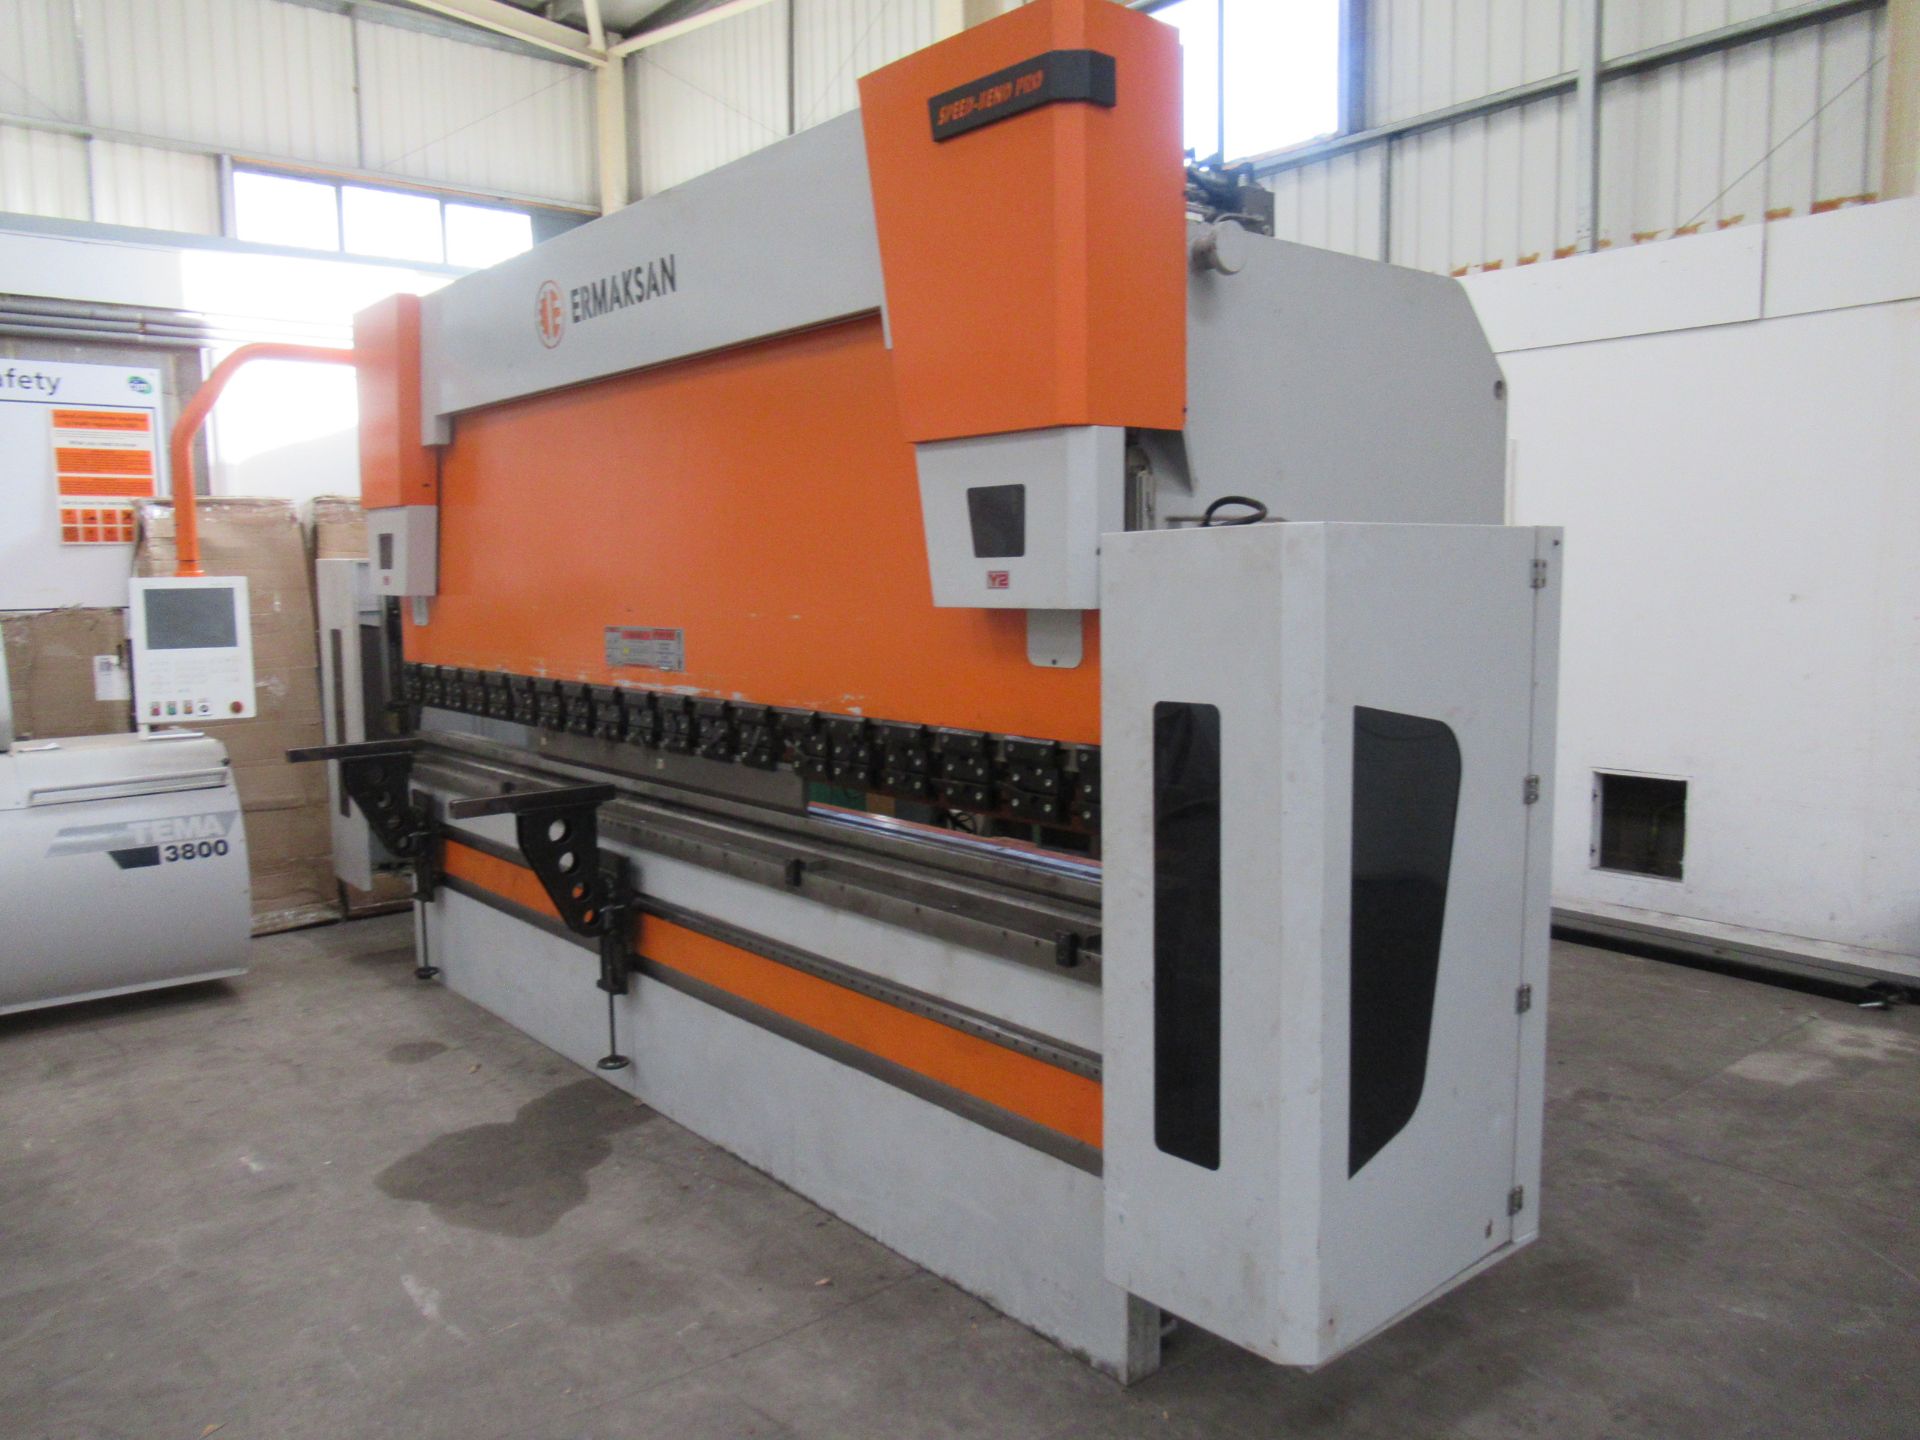 Ermaksan Speed-bend Pro 4100 x 220 CNC Hydraulic Press Brake and a selection of tooling for press br - Image 3 of 16